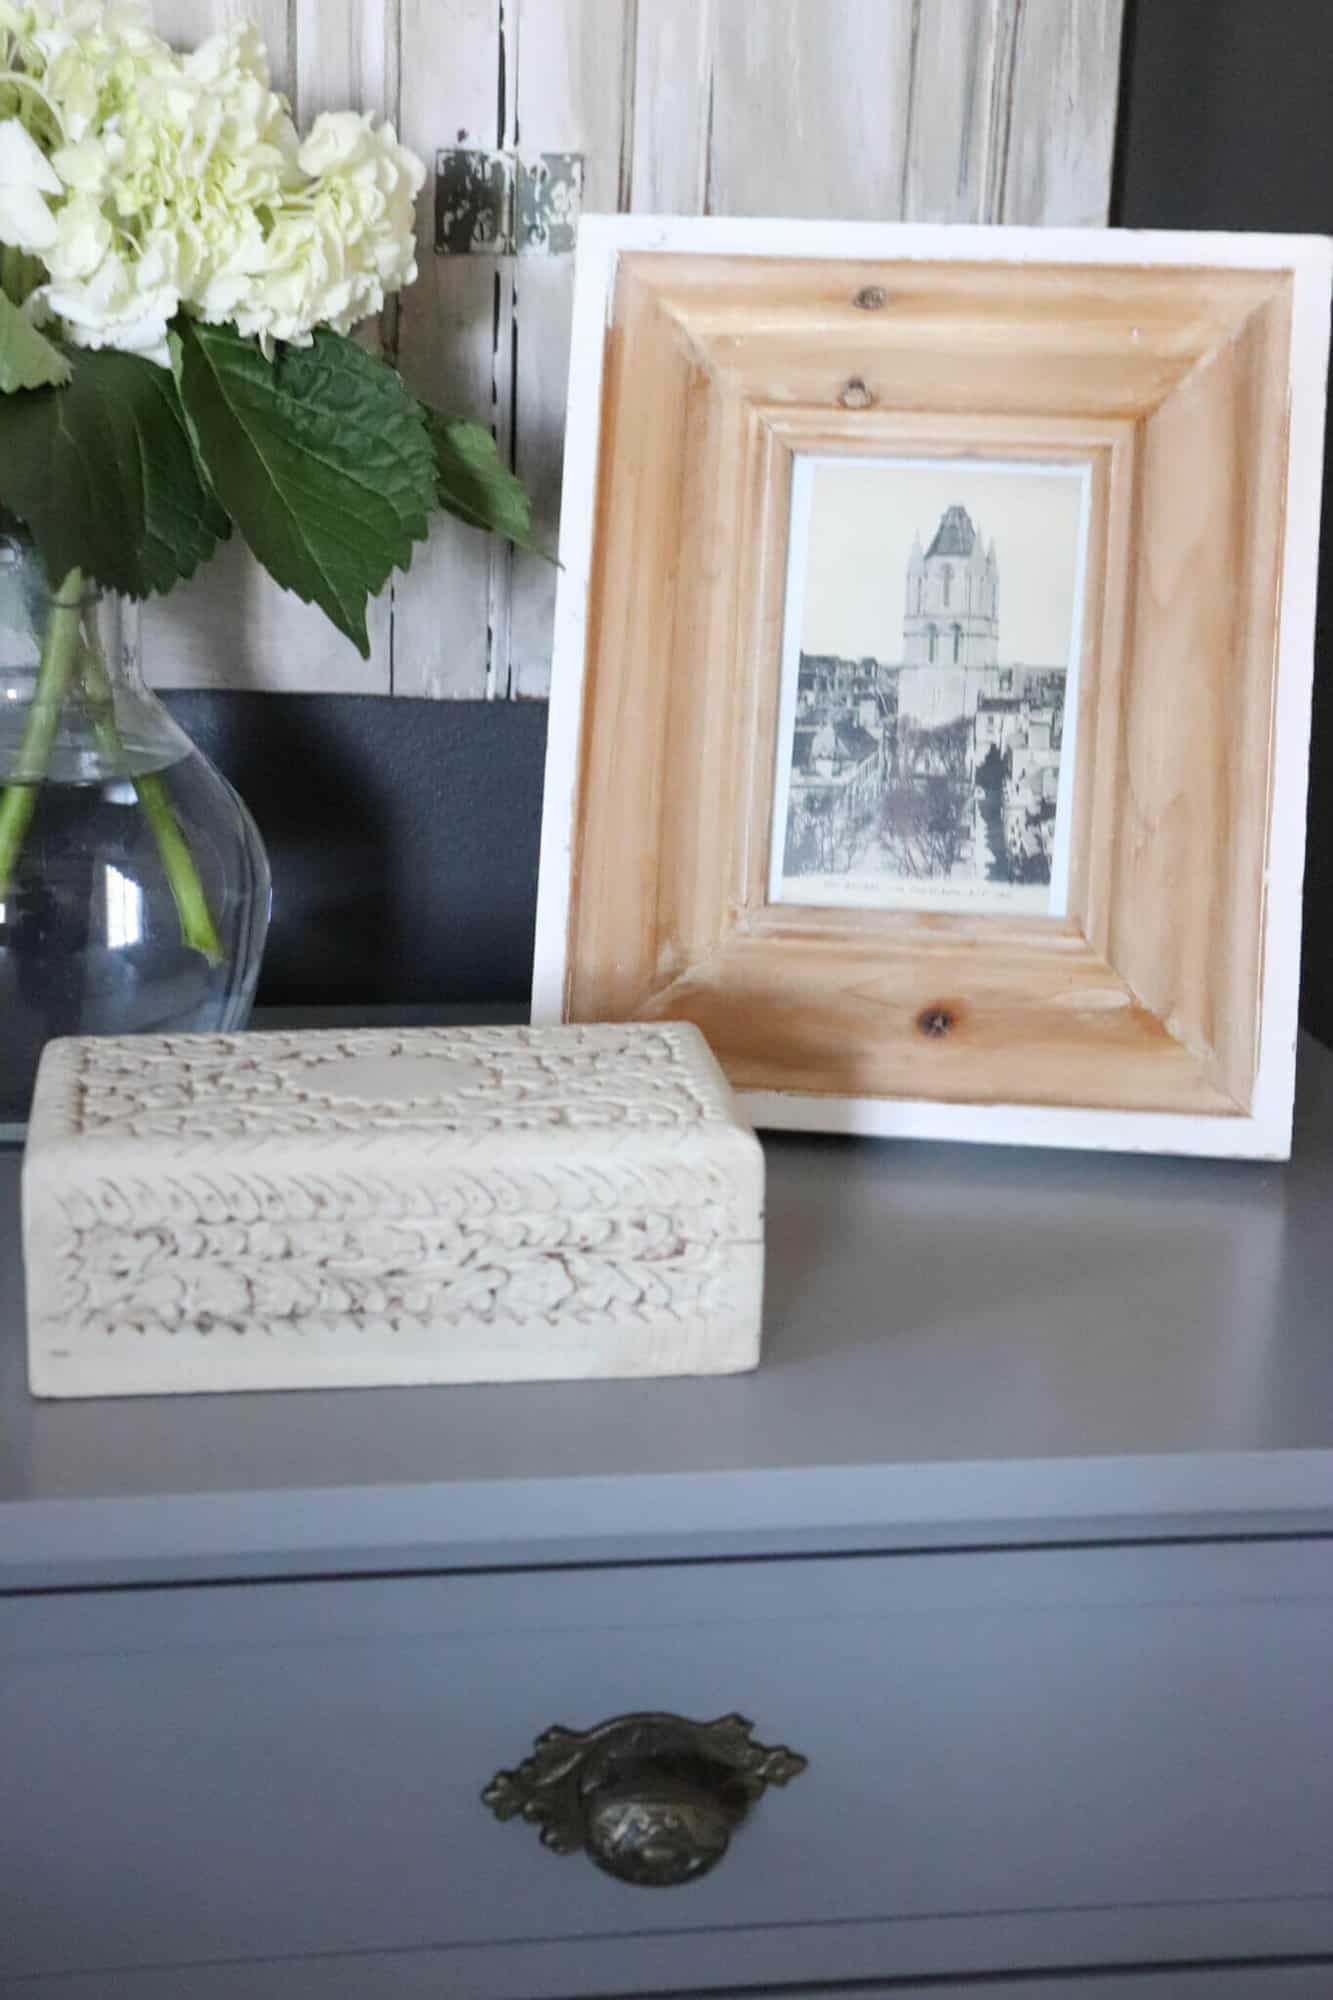 bedside table with hydrangeas and picture frame with vintage postcard